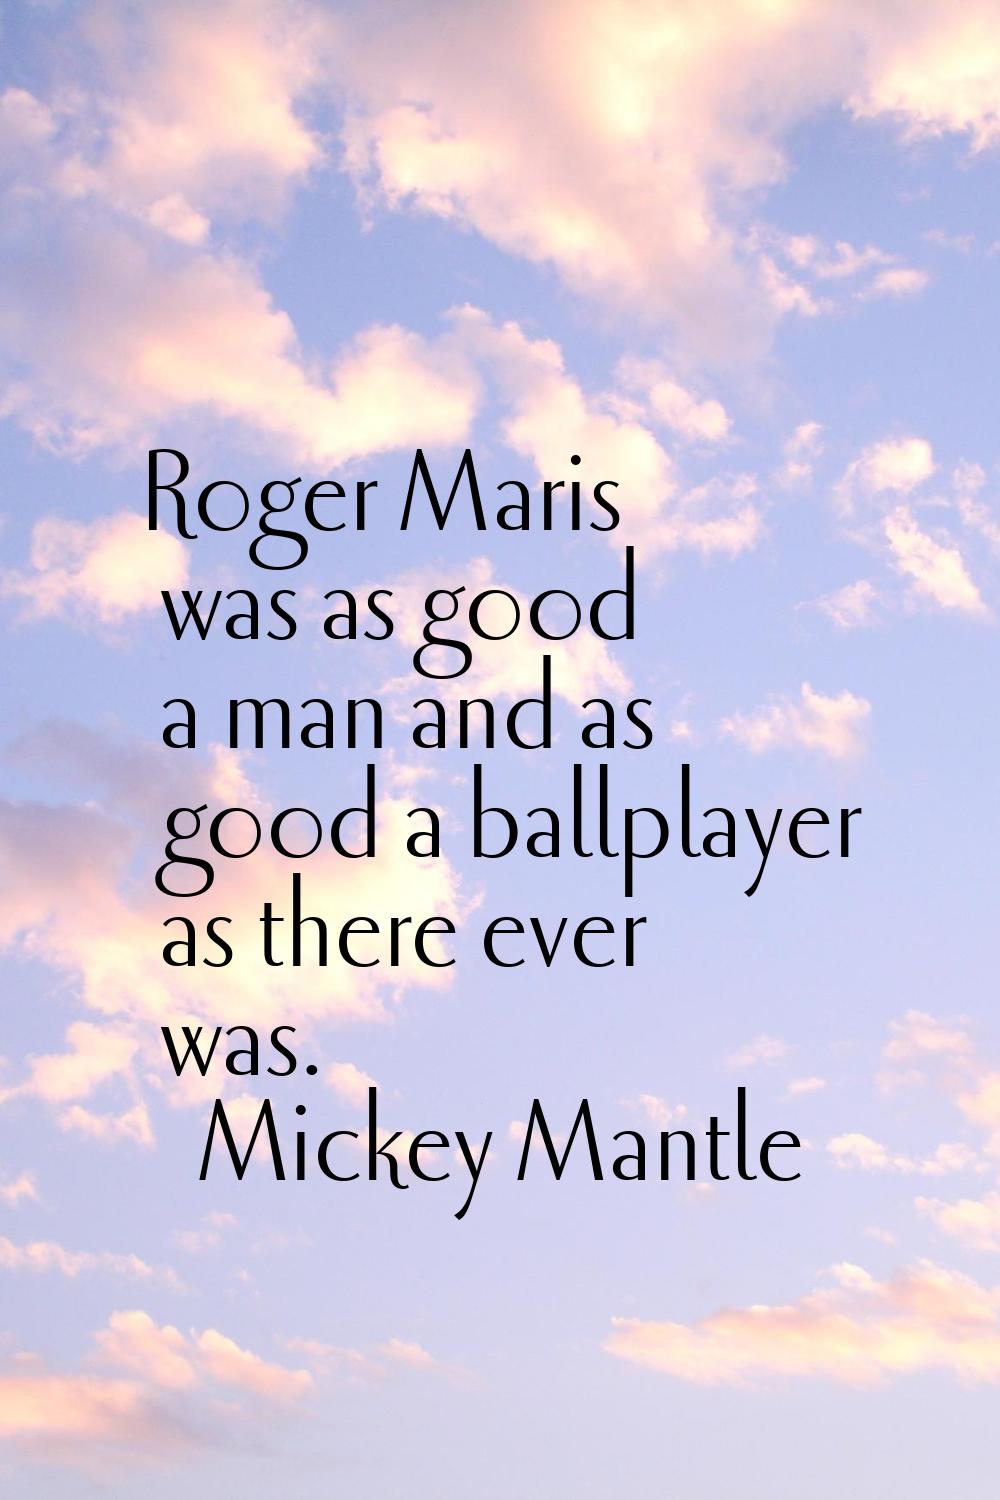 Roger Maris was as good a man and as good a ballplayer as there ever was.